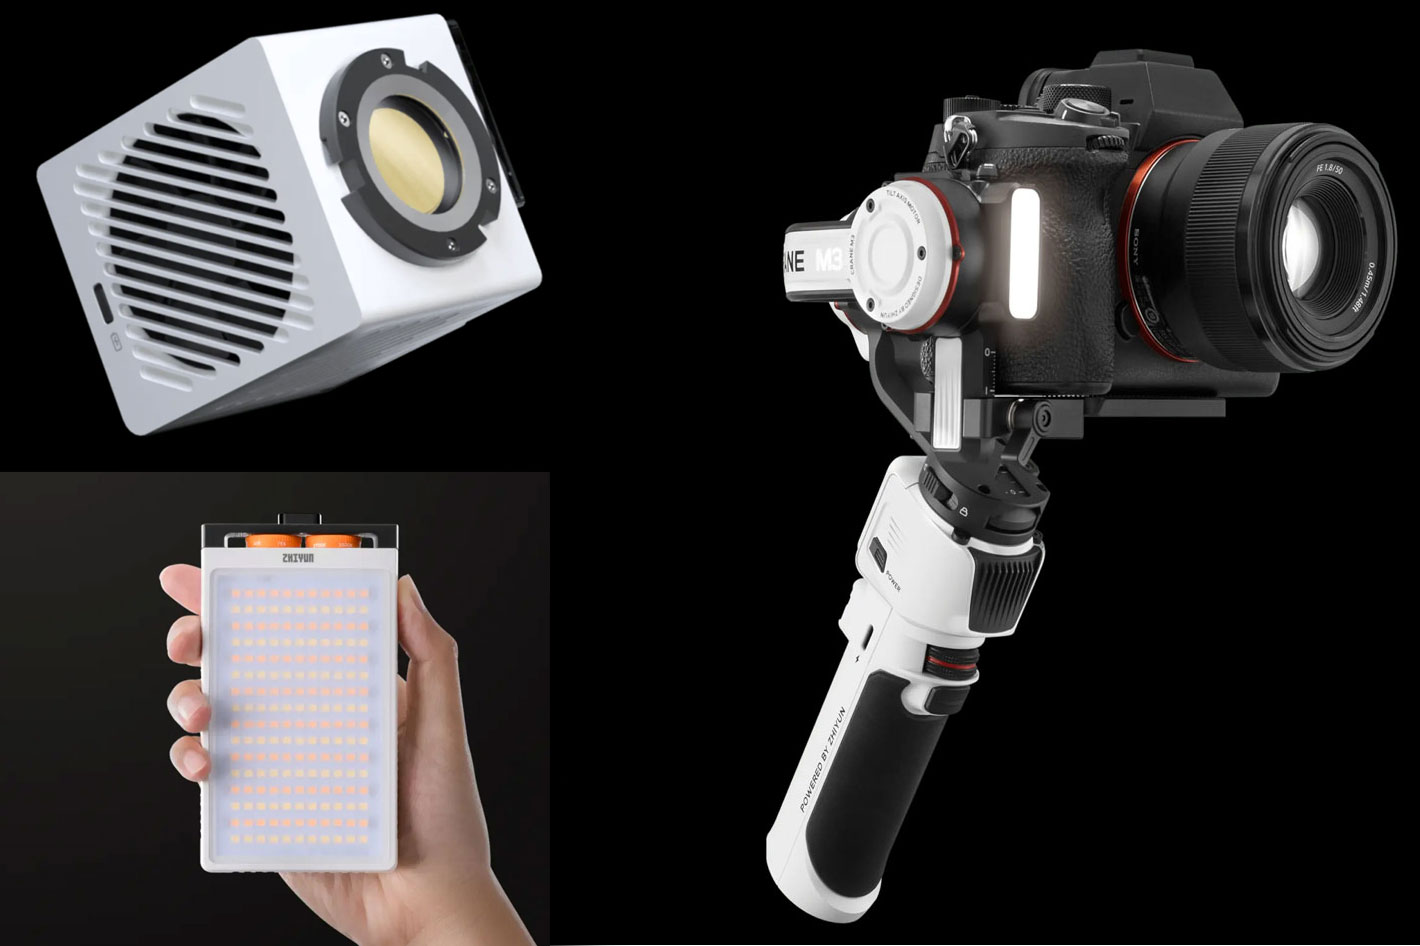 ZHIYUN to reveal WEEBILL 3S and CRANE-M3S at NAB 2023